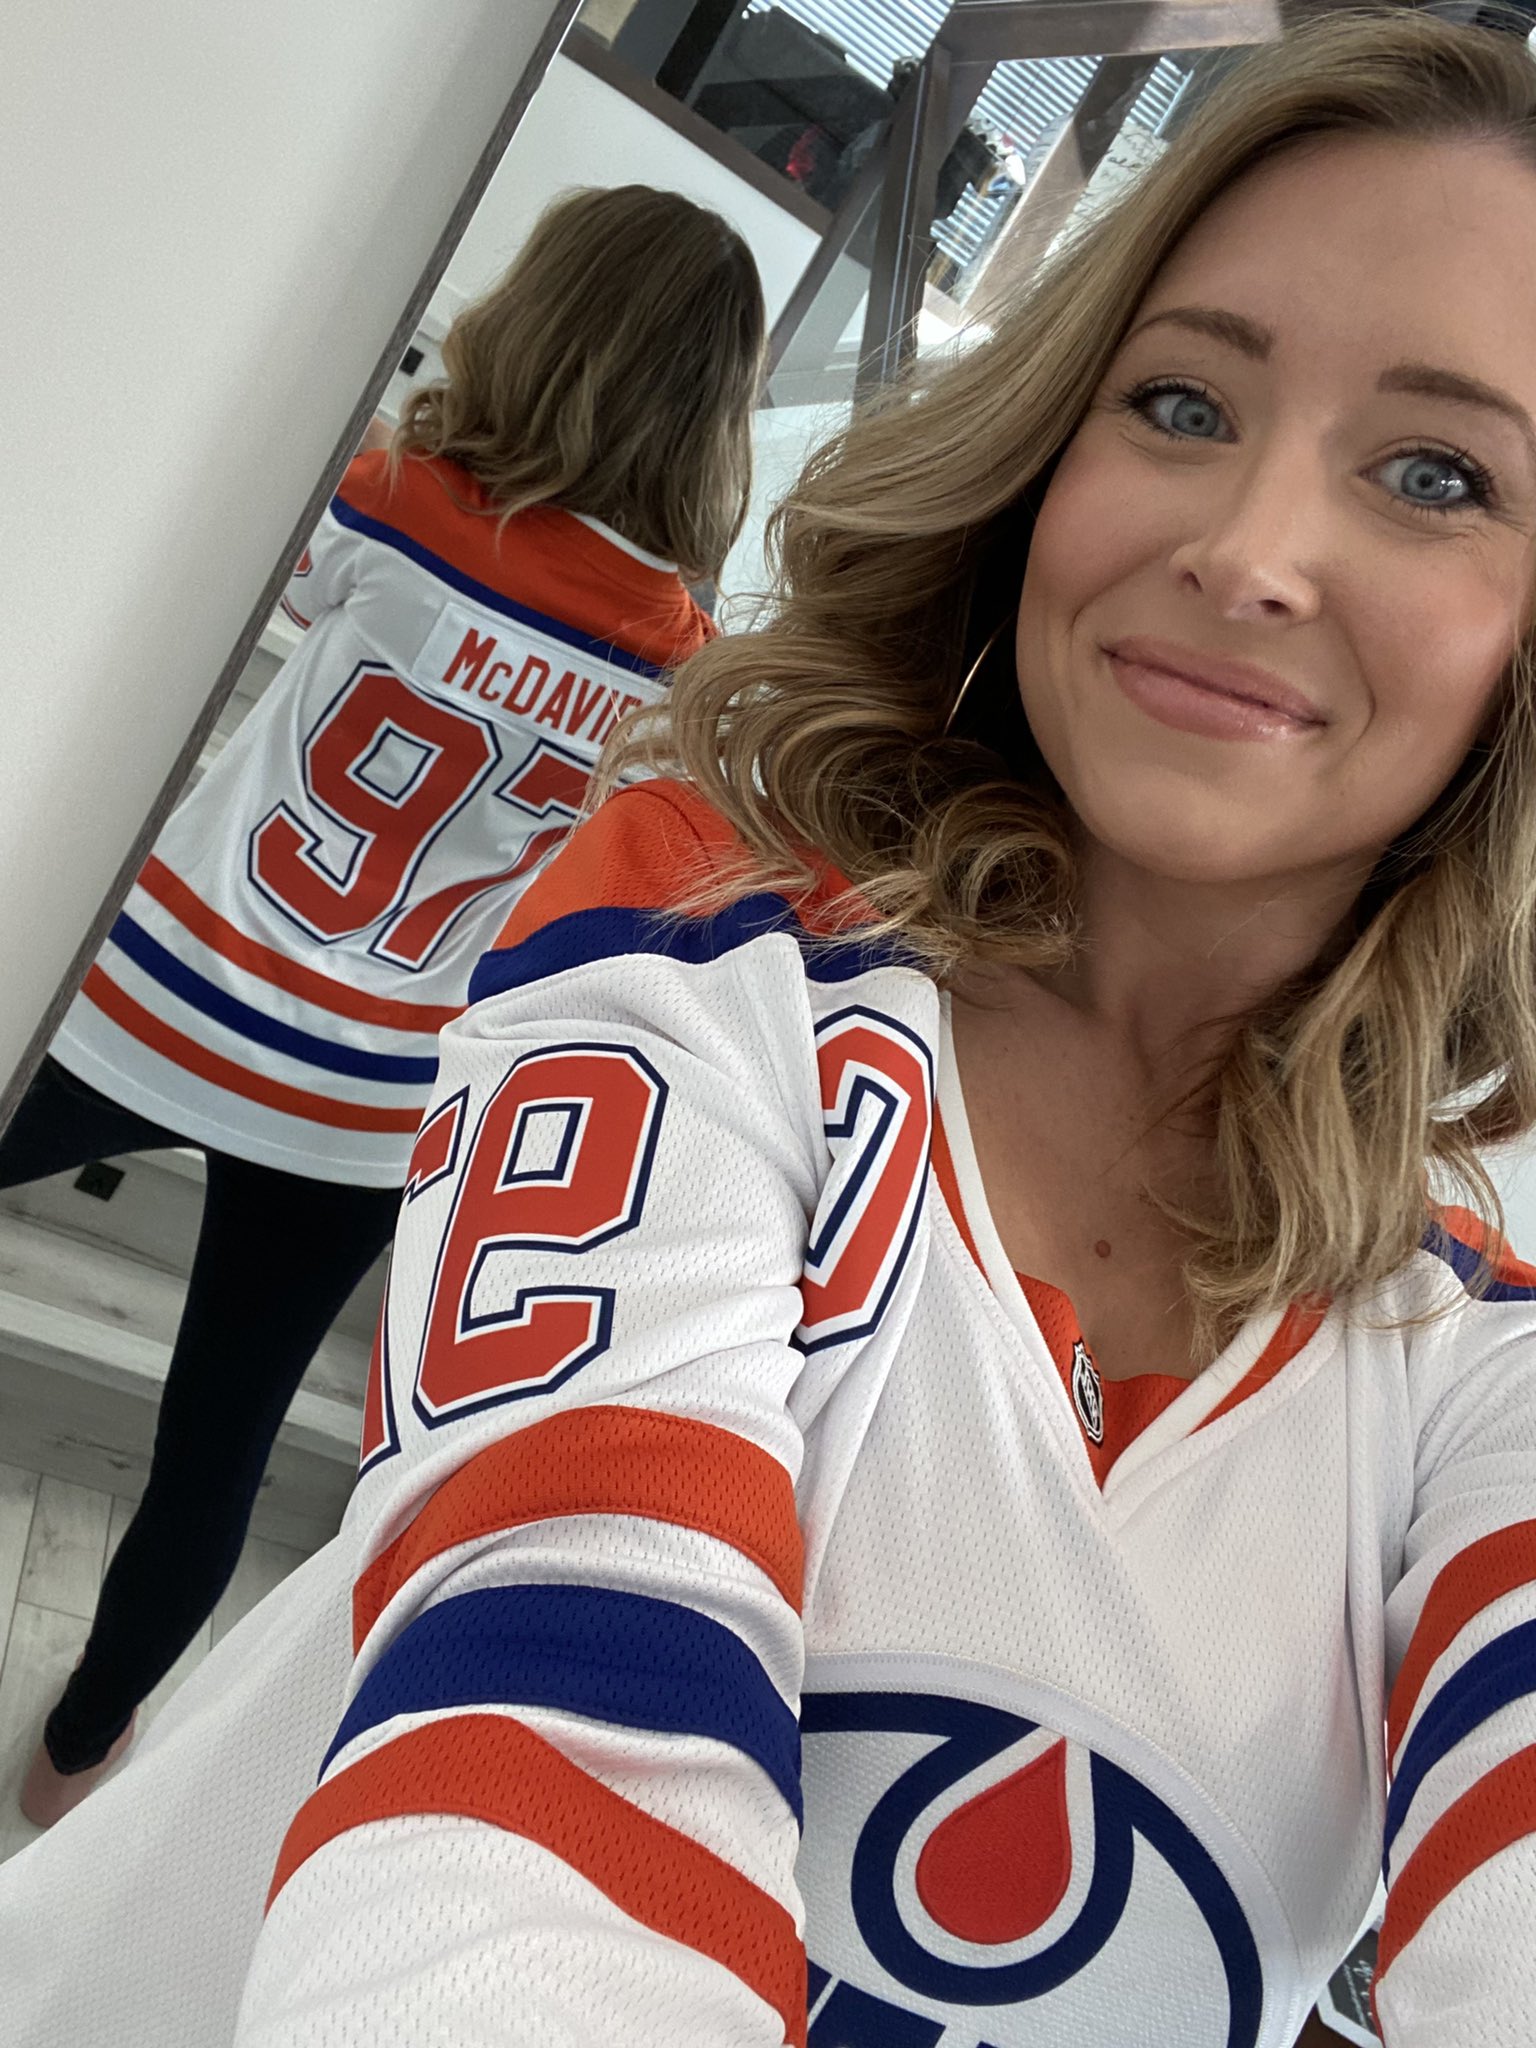 Sacha on X: Got my child size Oilers jersey on for the game